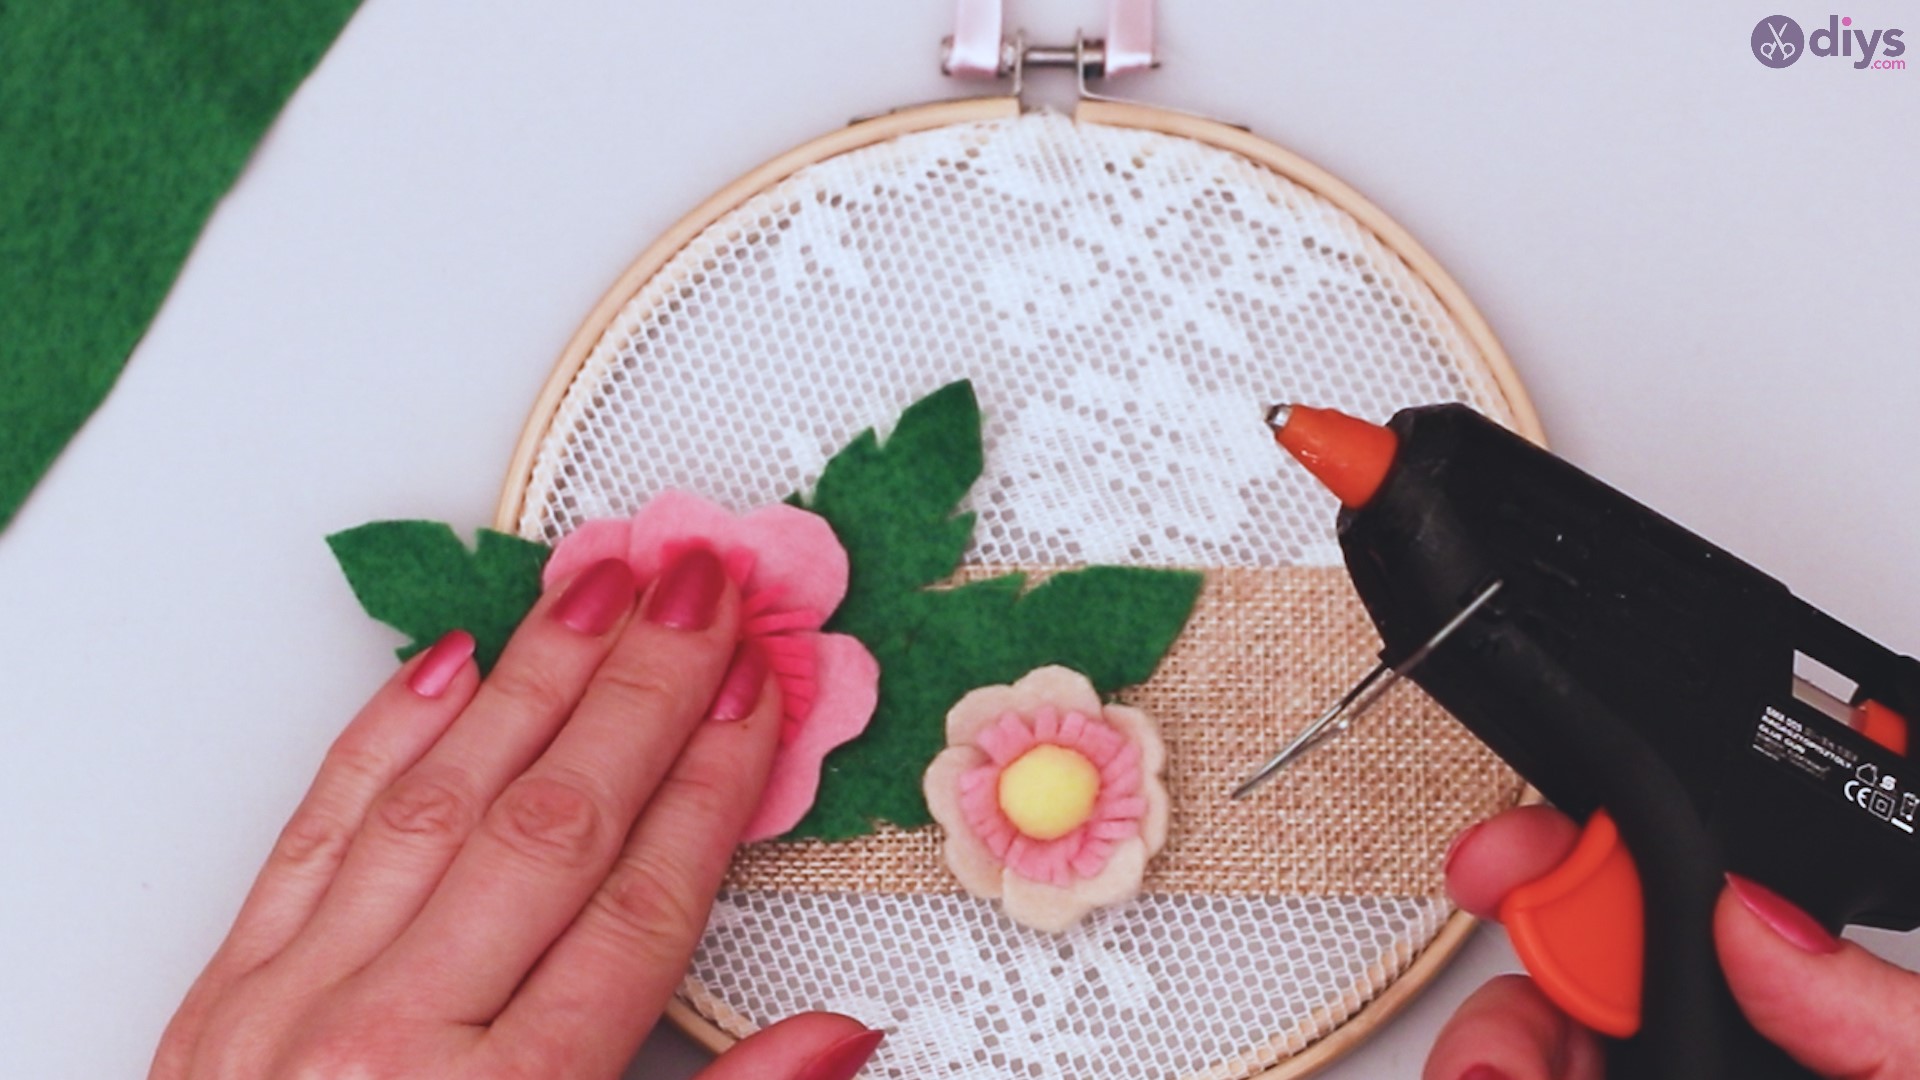 Diy embroidery hoop wall decor tutorial step by step (61)